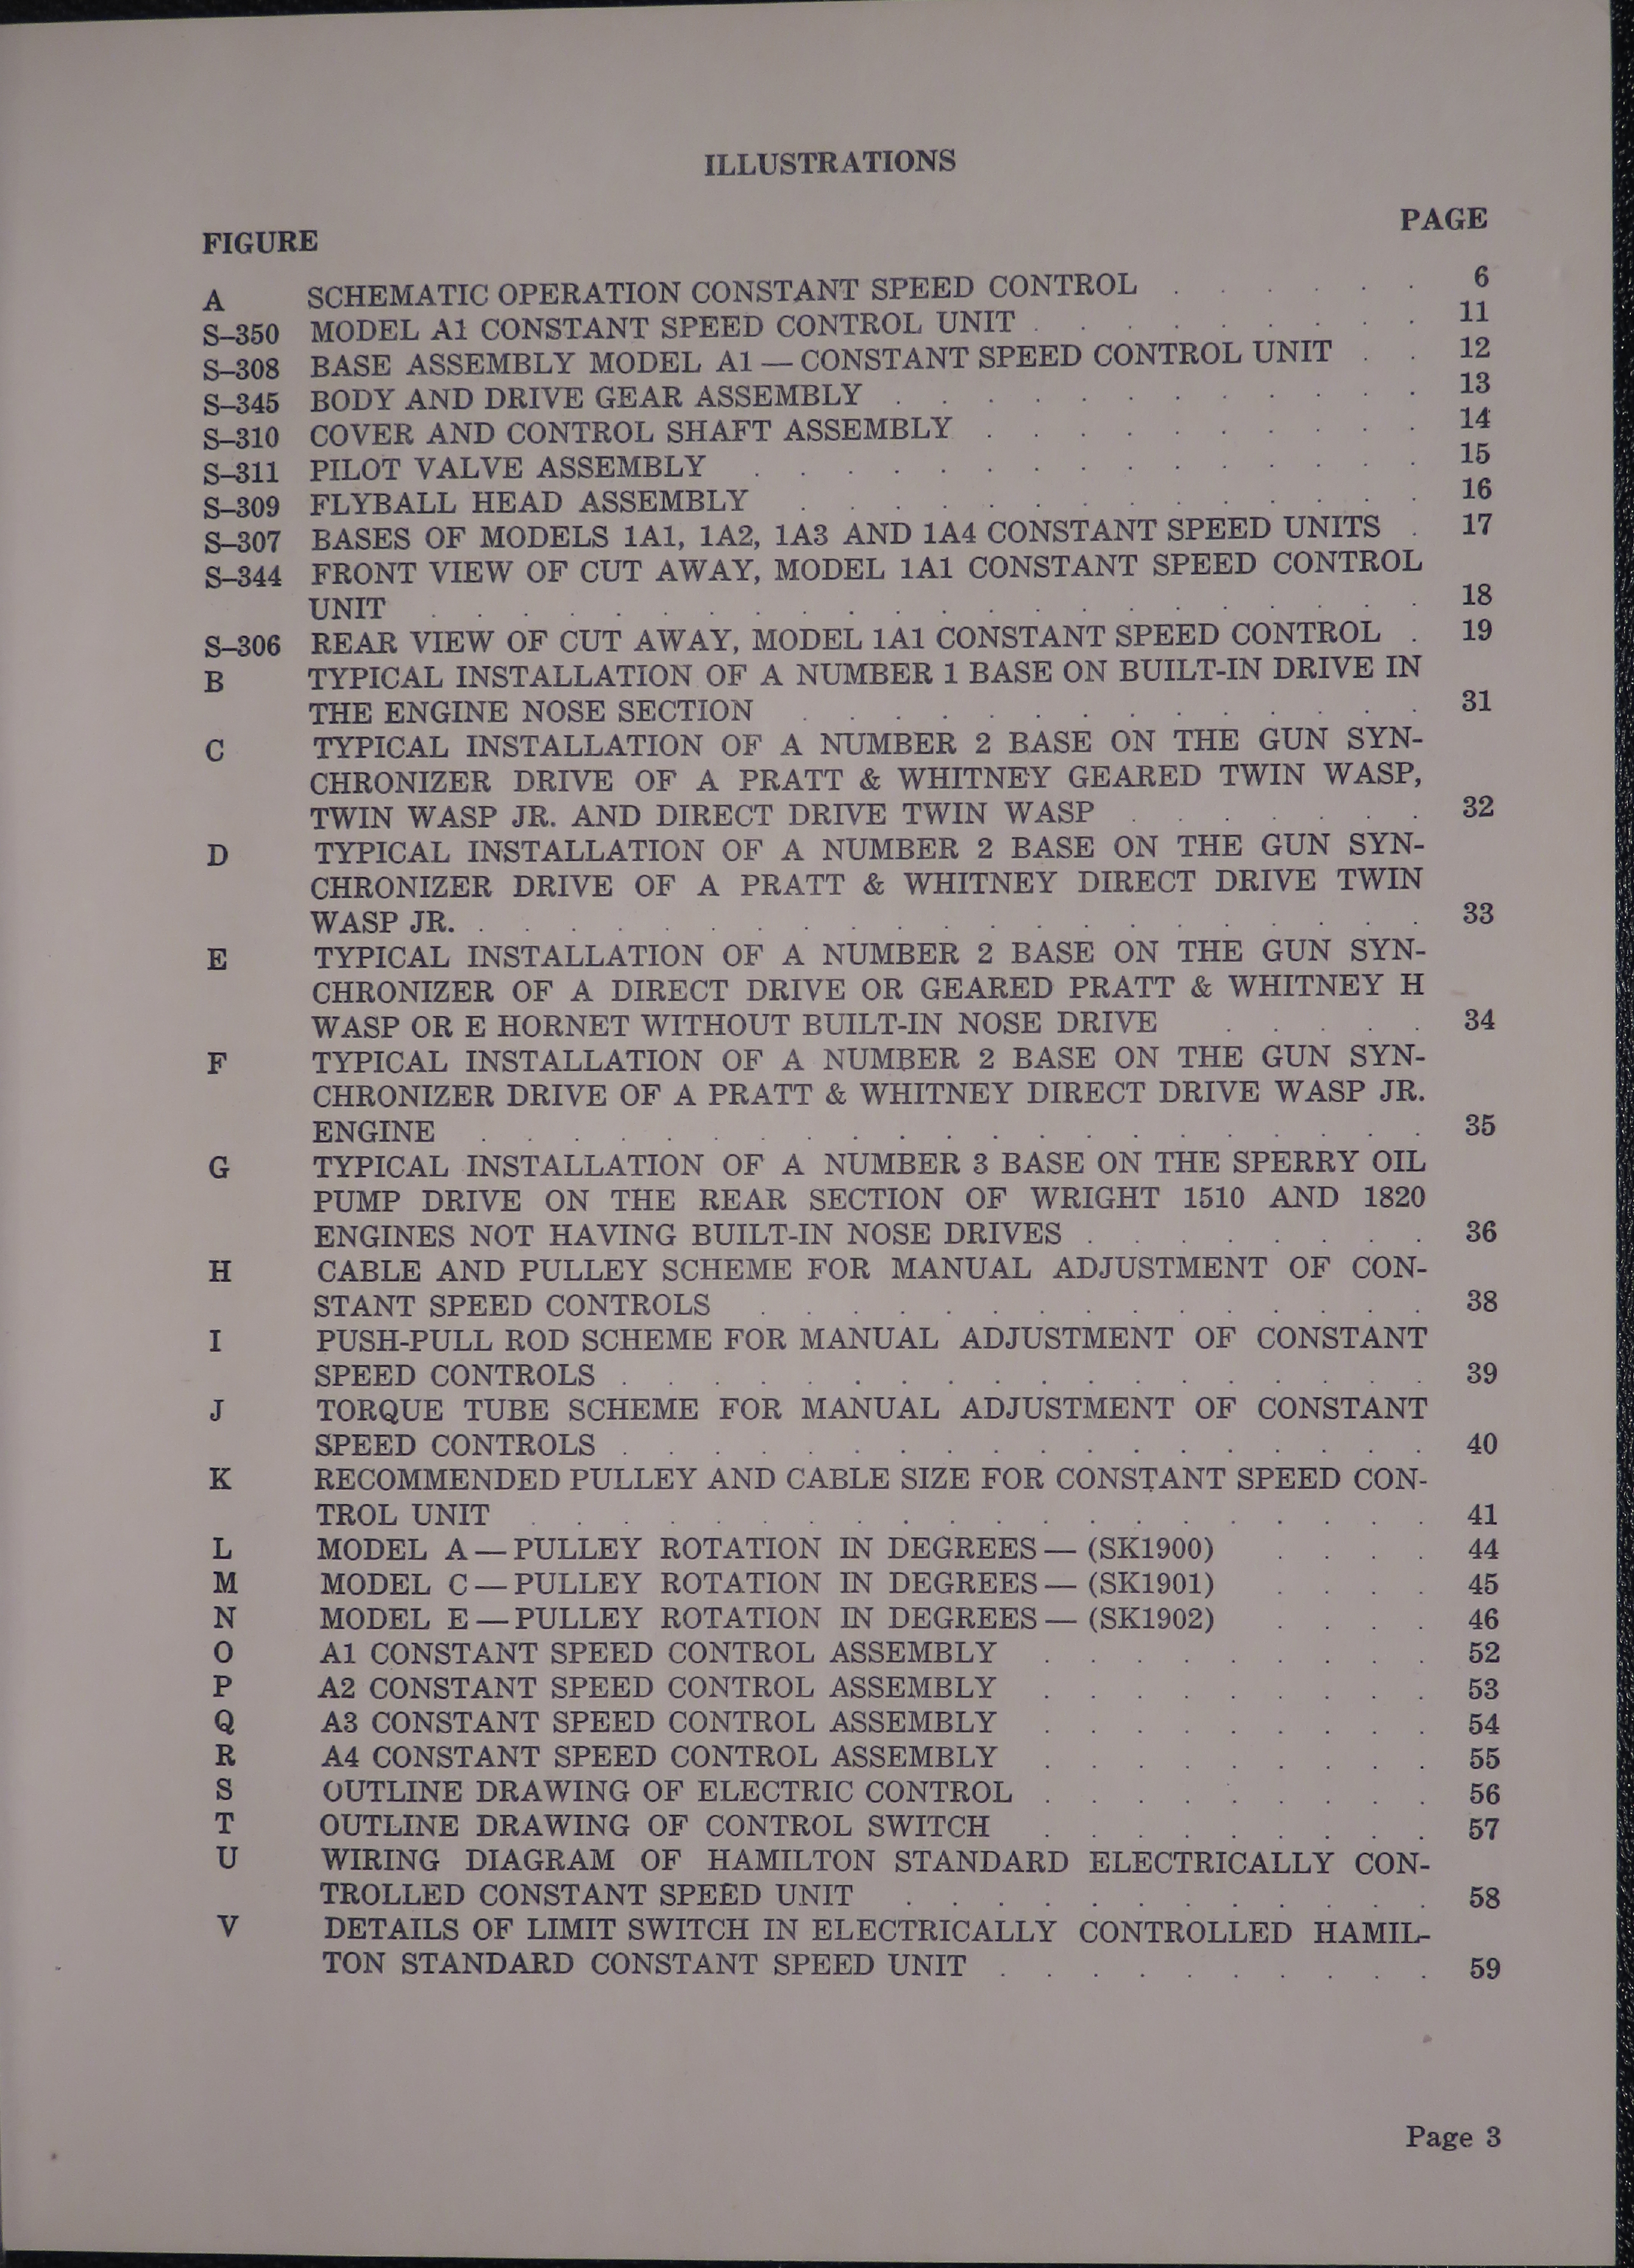 Sample page 7 from AirCorps Library document: Constant Speed Control Service Manual